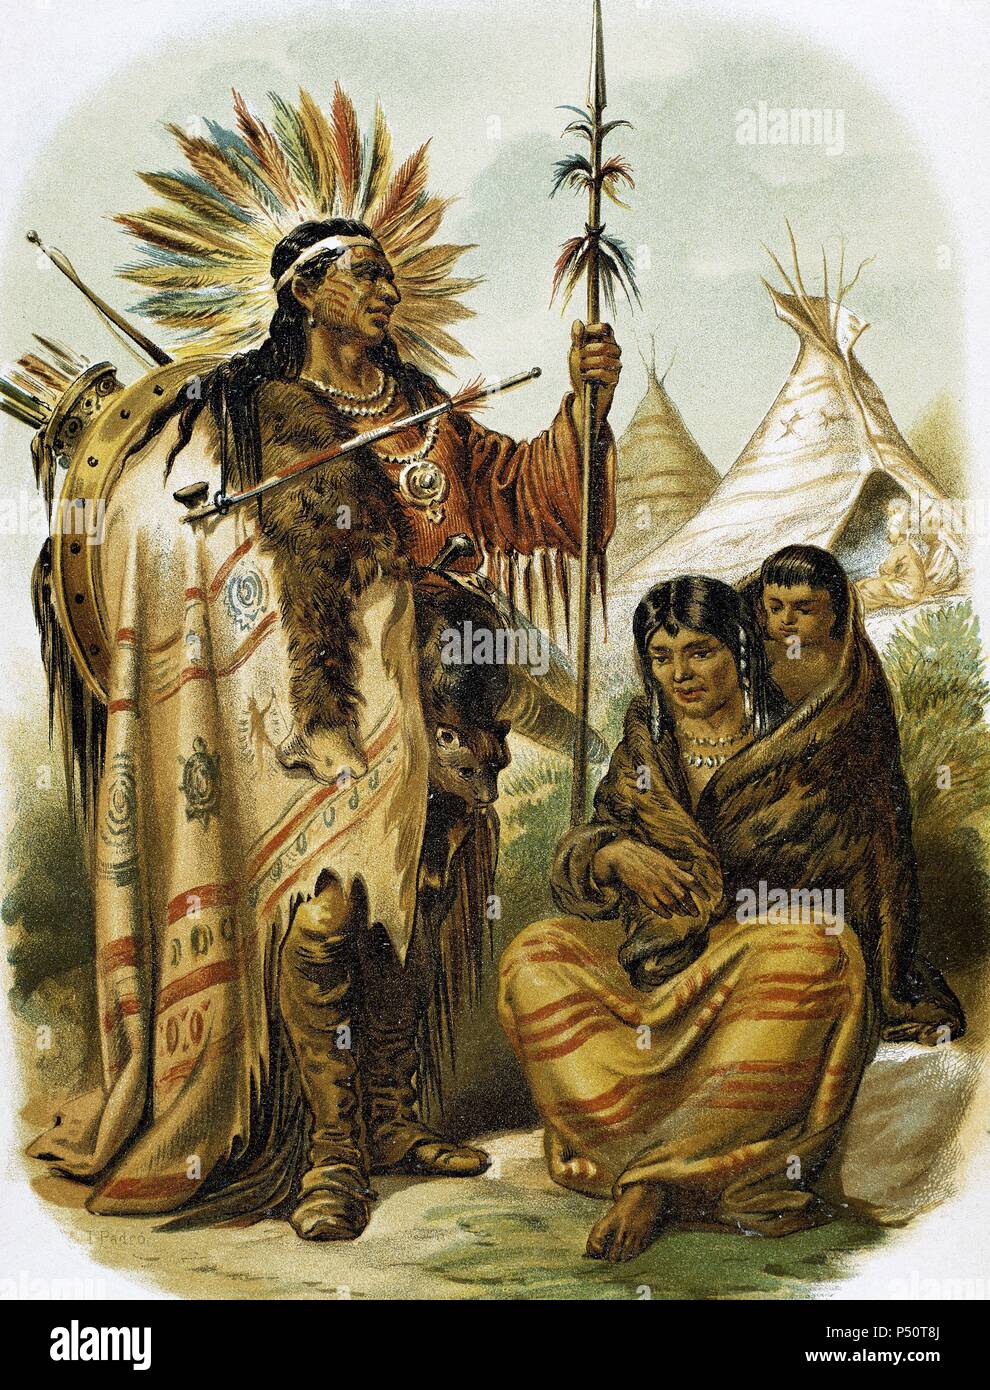 American indians. Indian red race. Colored engraving, late 19th century. Stock Photo